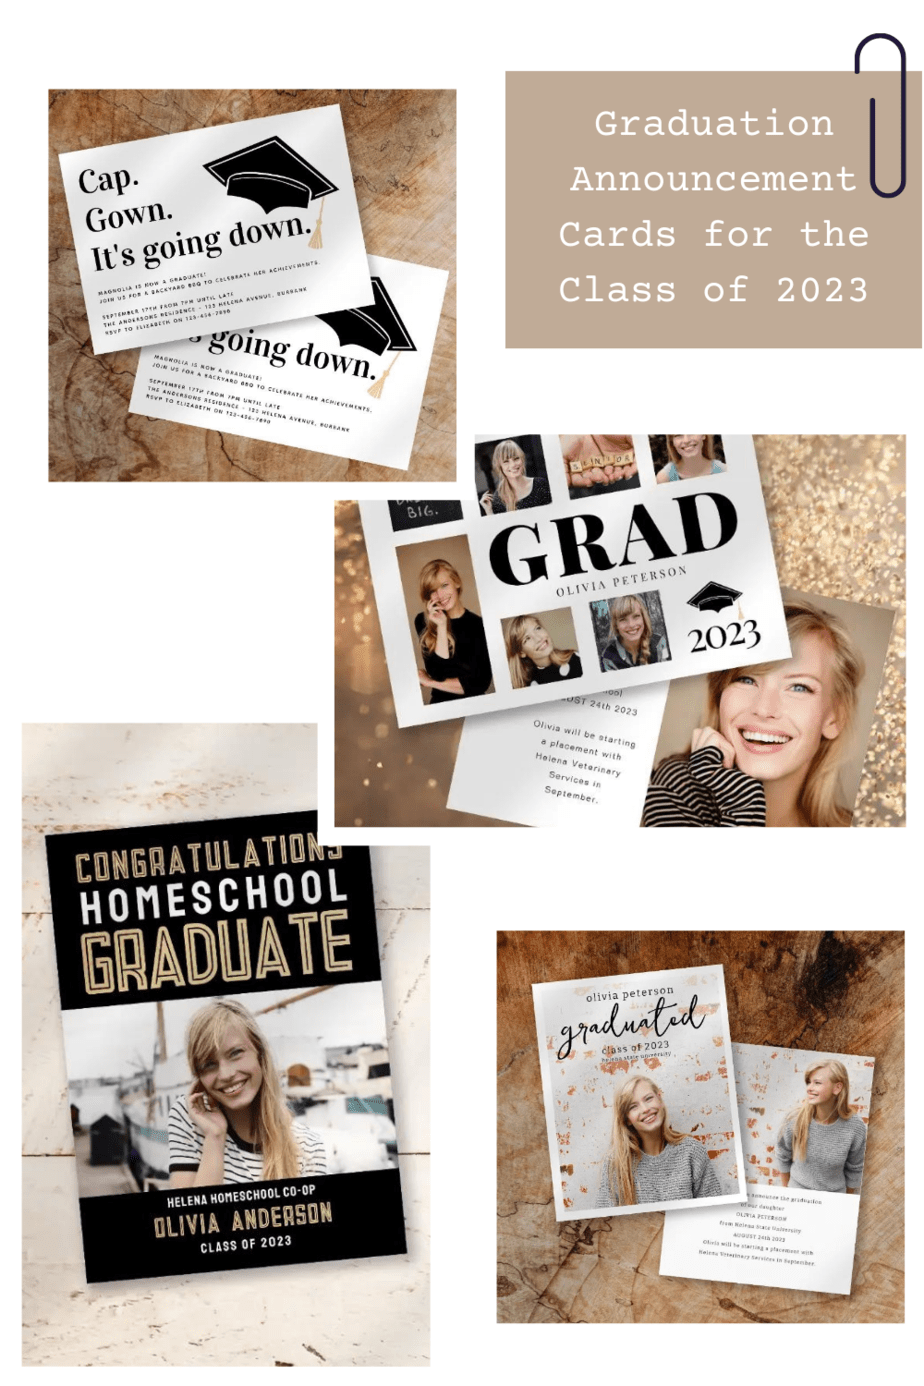 Graduation Announcement Cards for the Class of 2023